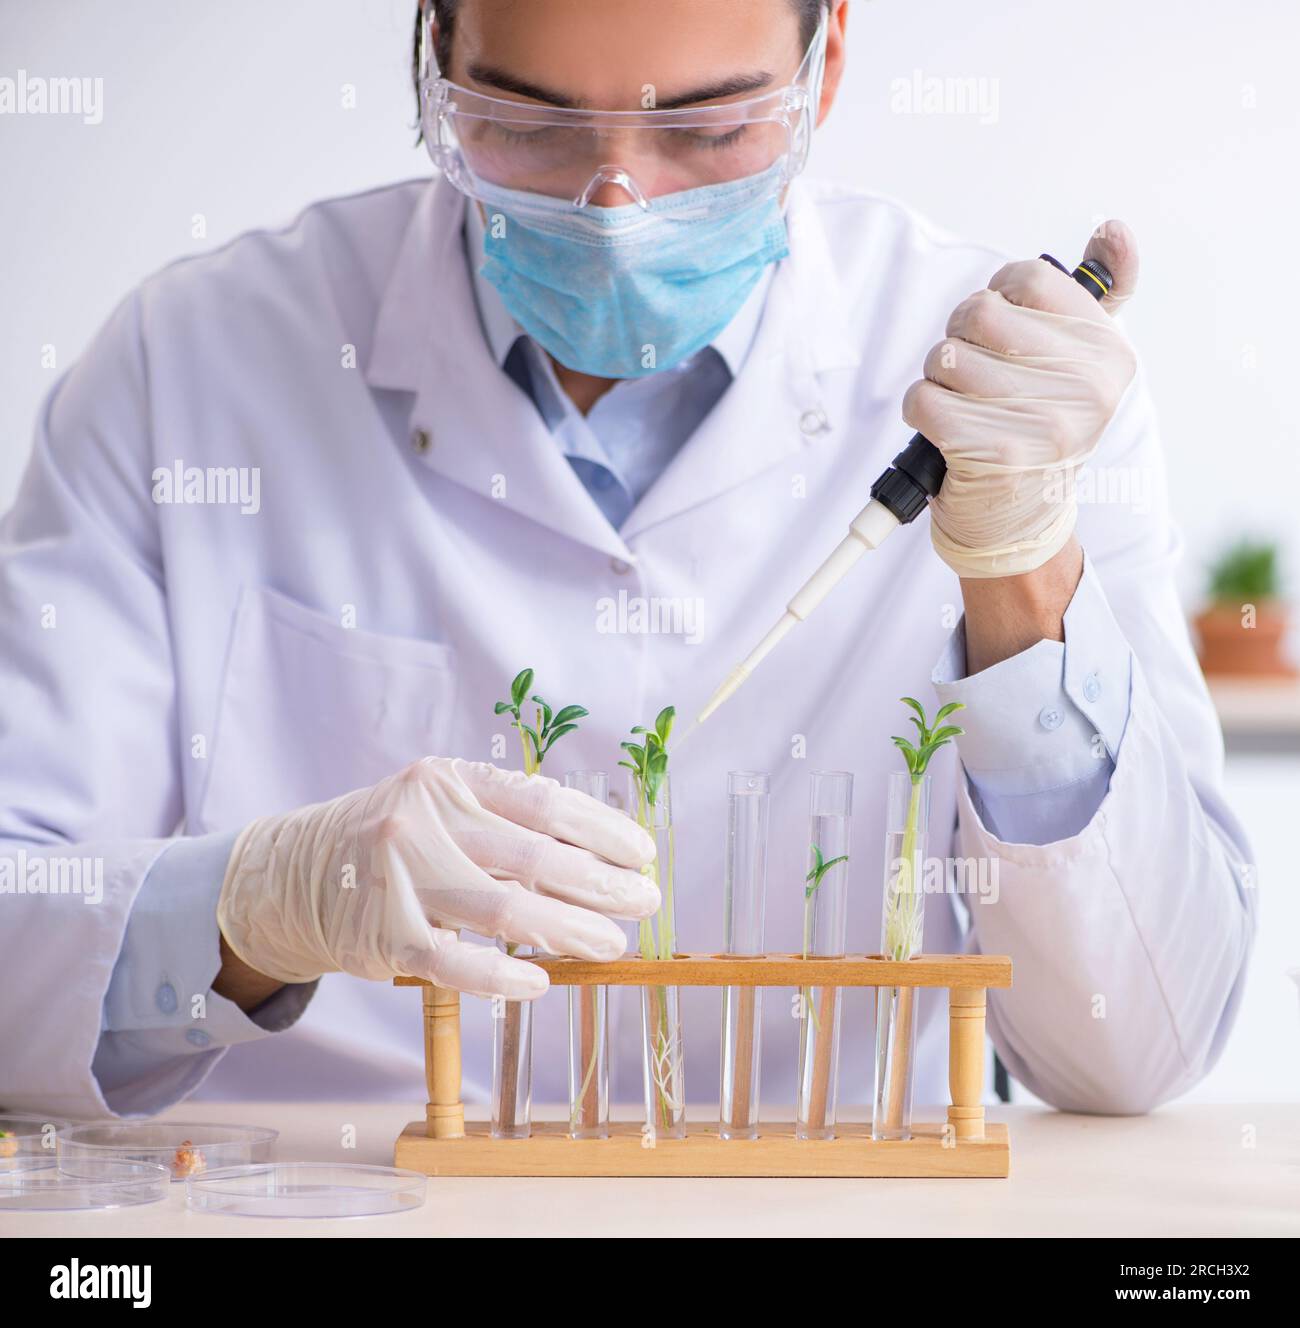 The young male chemist working in the lab Stock Photo